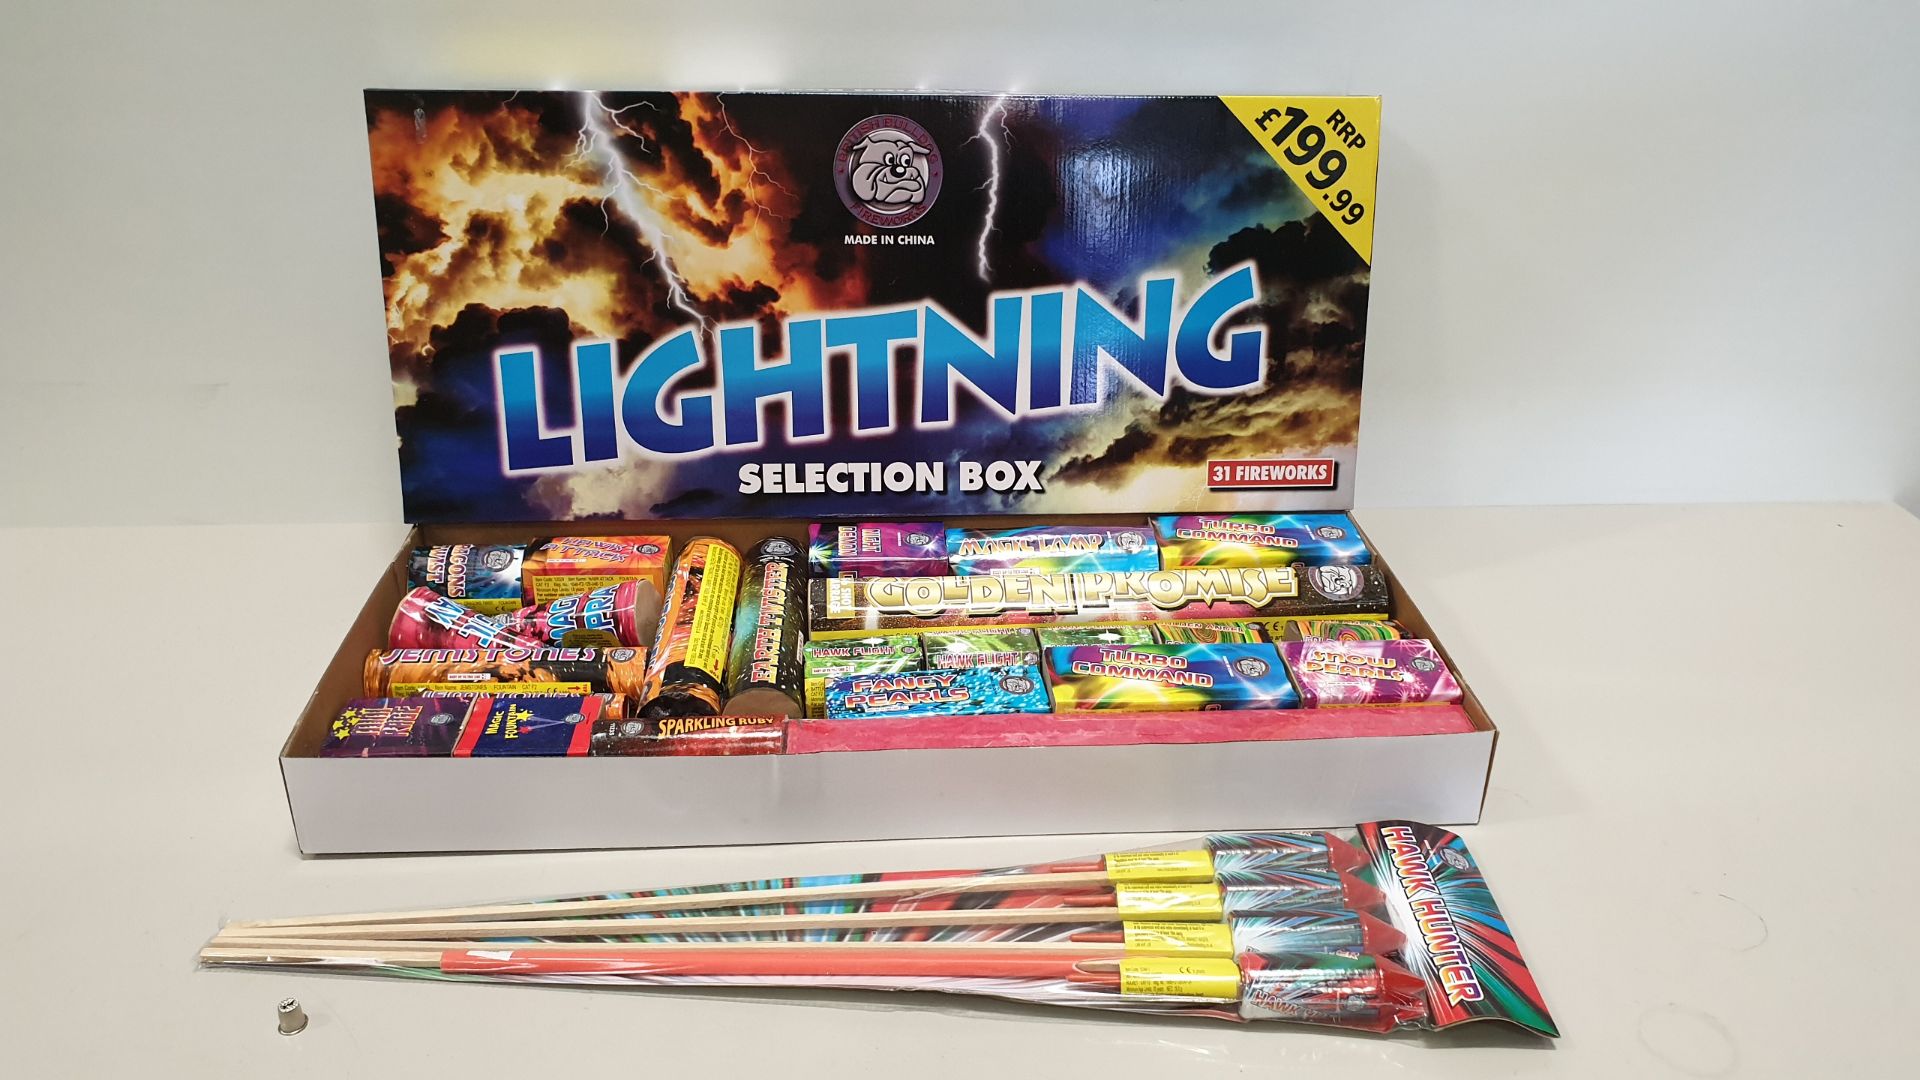 62 X ASSORTED BRITISH BULLDOG FIREWORKS - CONSISTING OF 2 X BRAND NEW 31PC LIGHTNING SELECTION BOXES